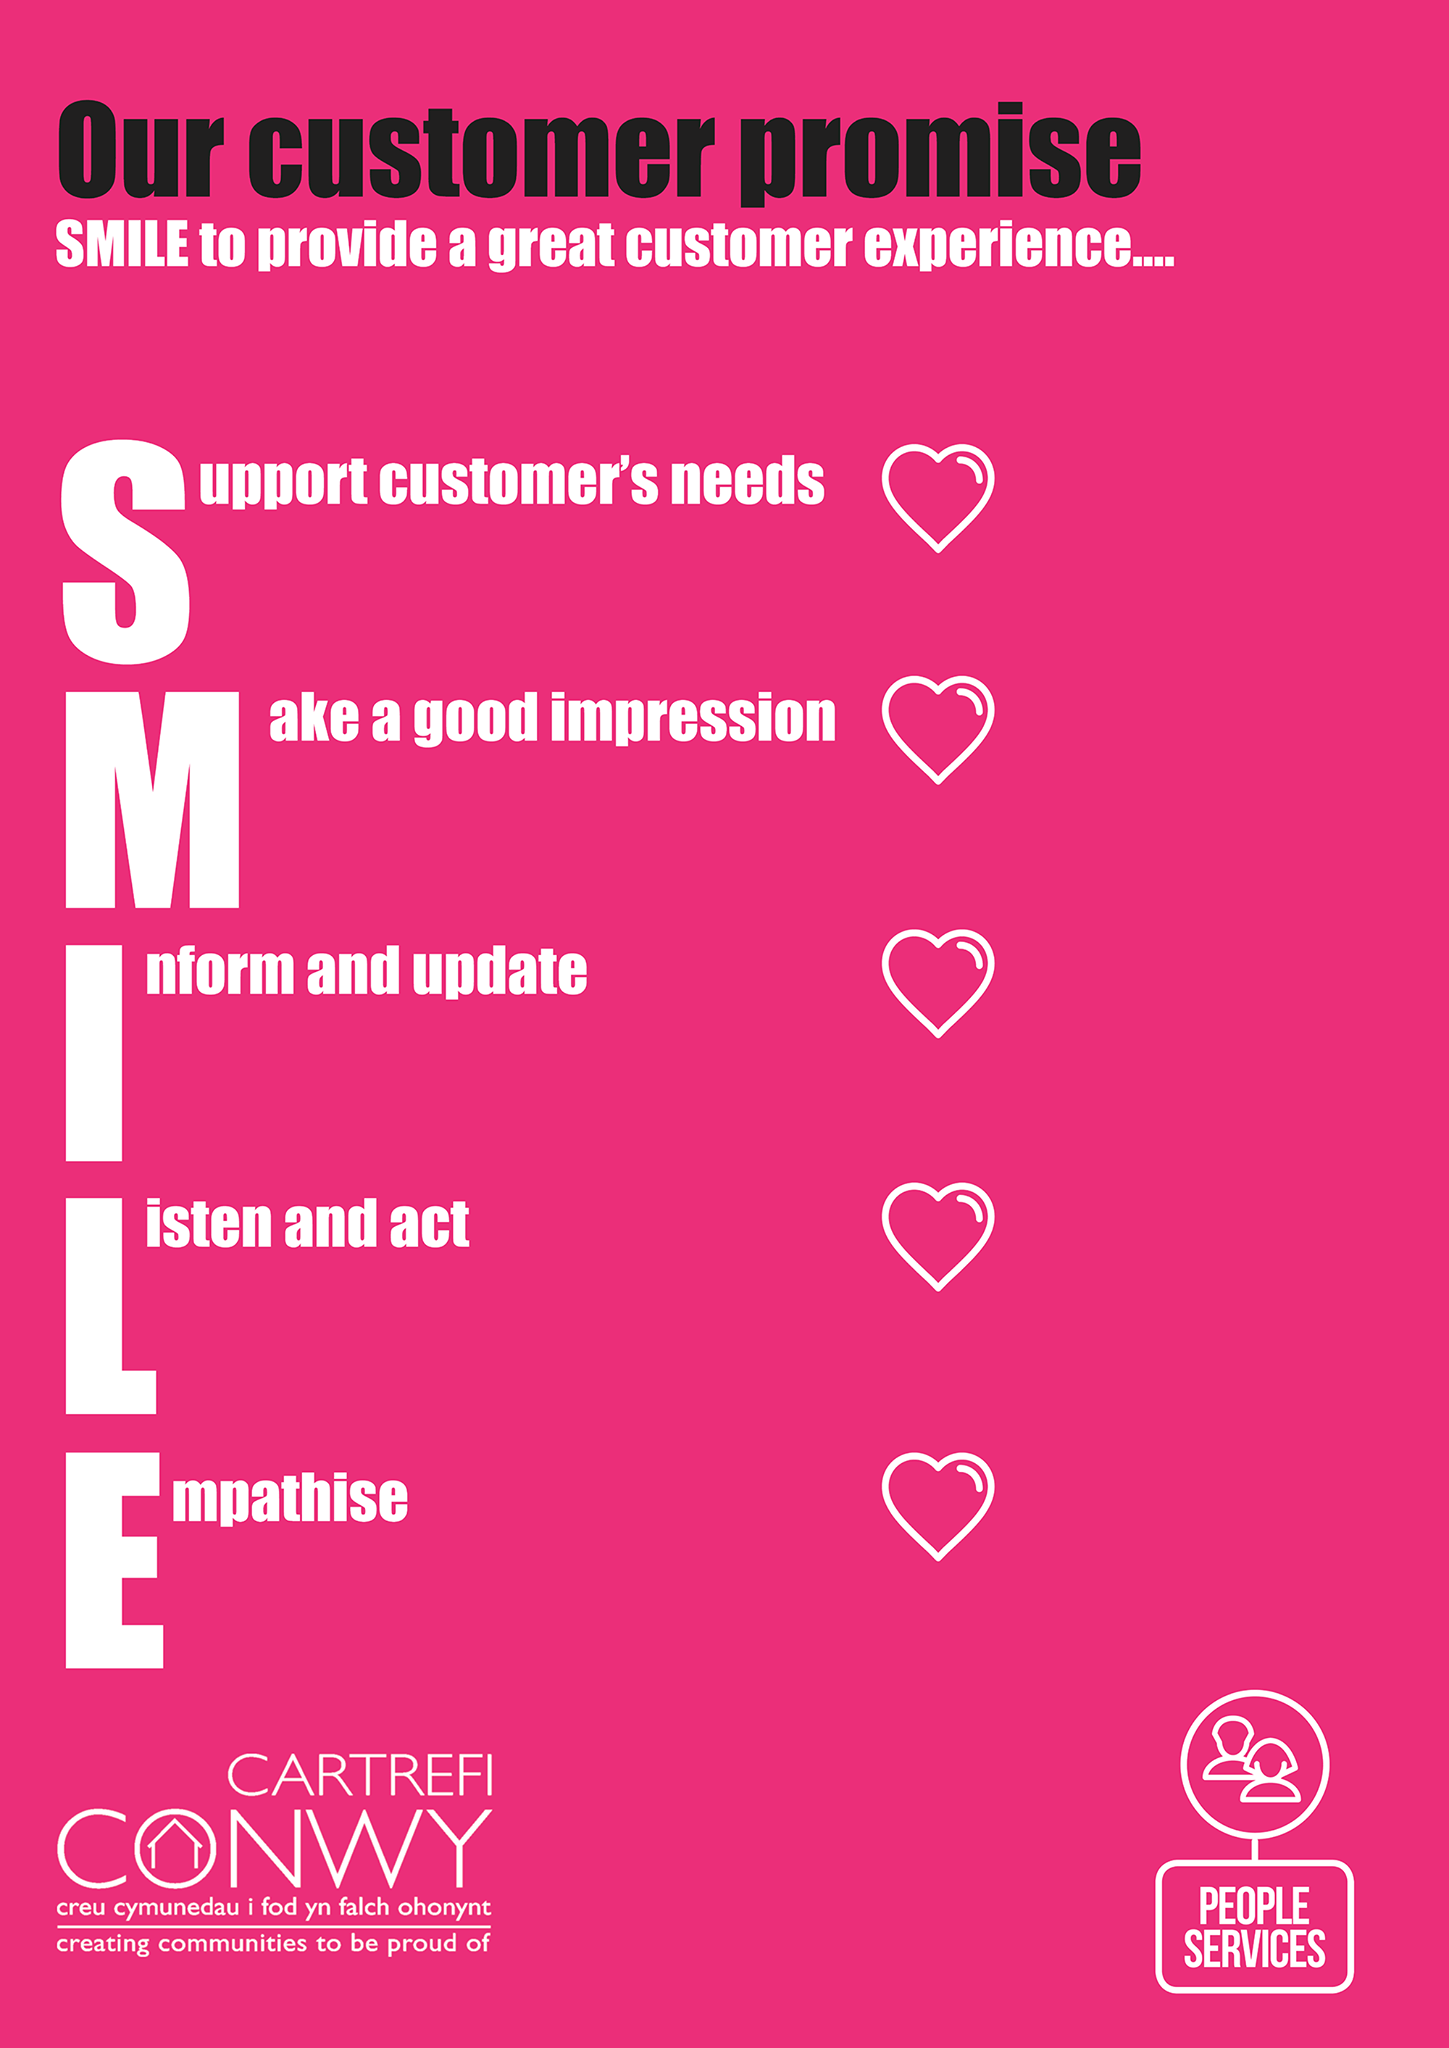 Pink graphic covering our SMILE customer promise